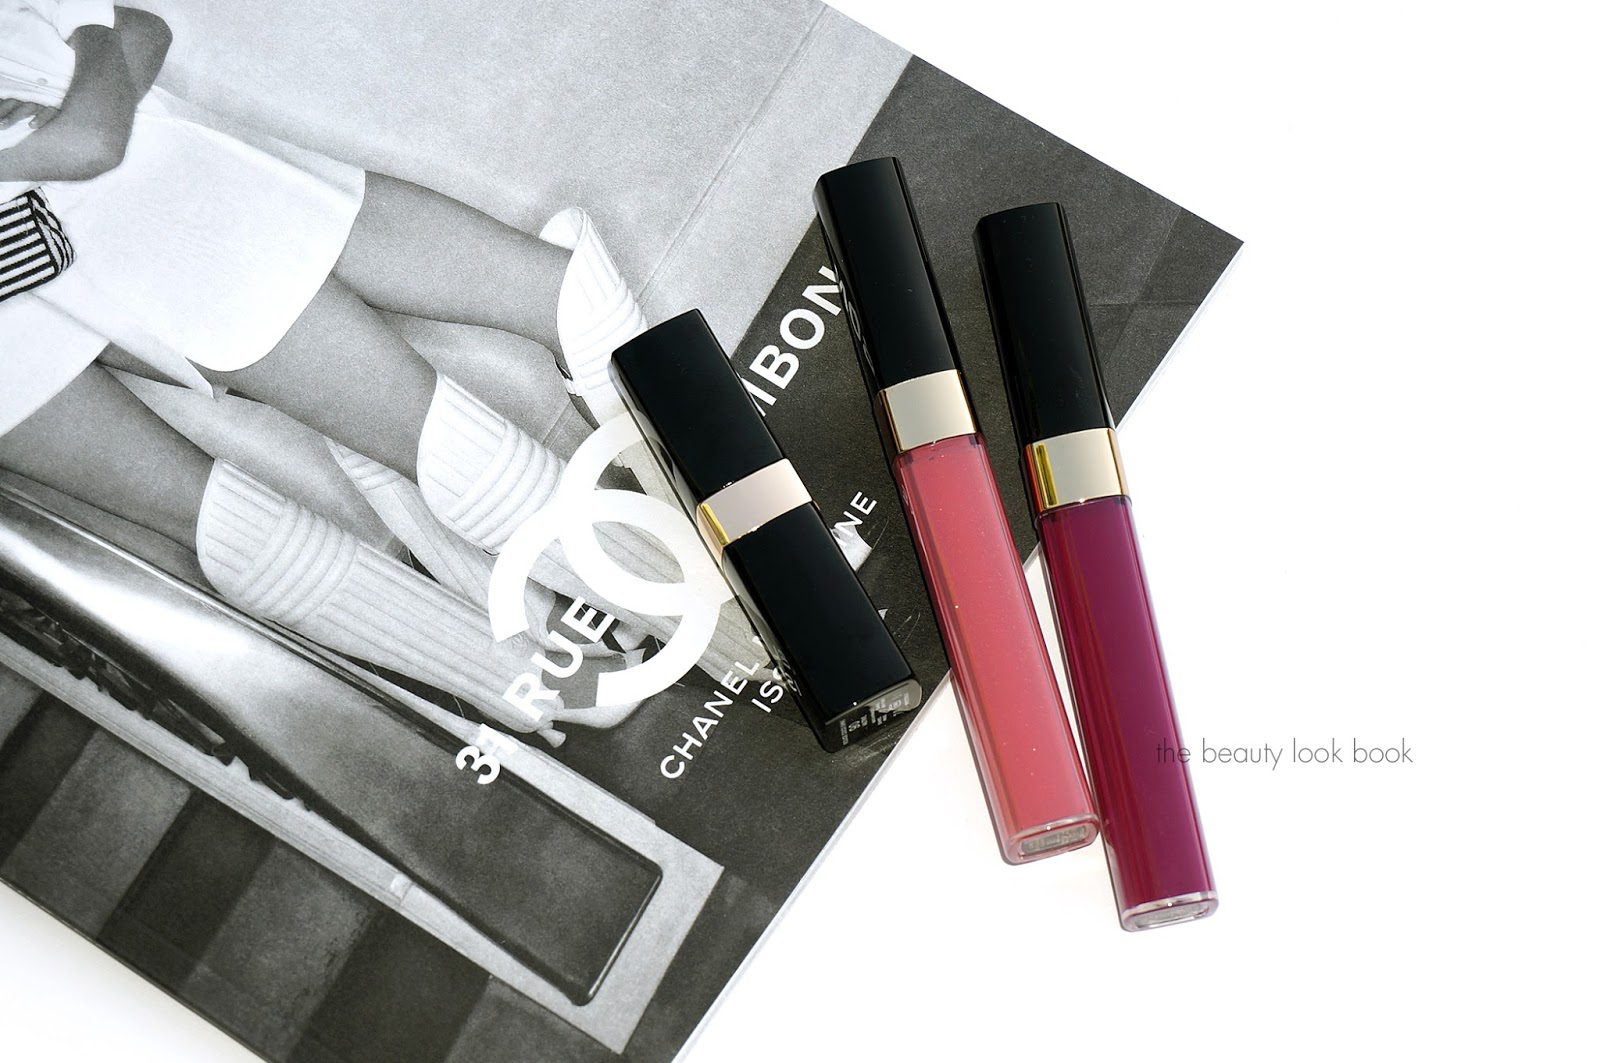 Chanel Mutine #90 Rouge Coco Shine, Bliss #181 and Tocade #182 Glossimers